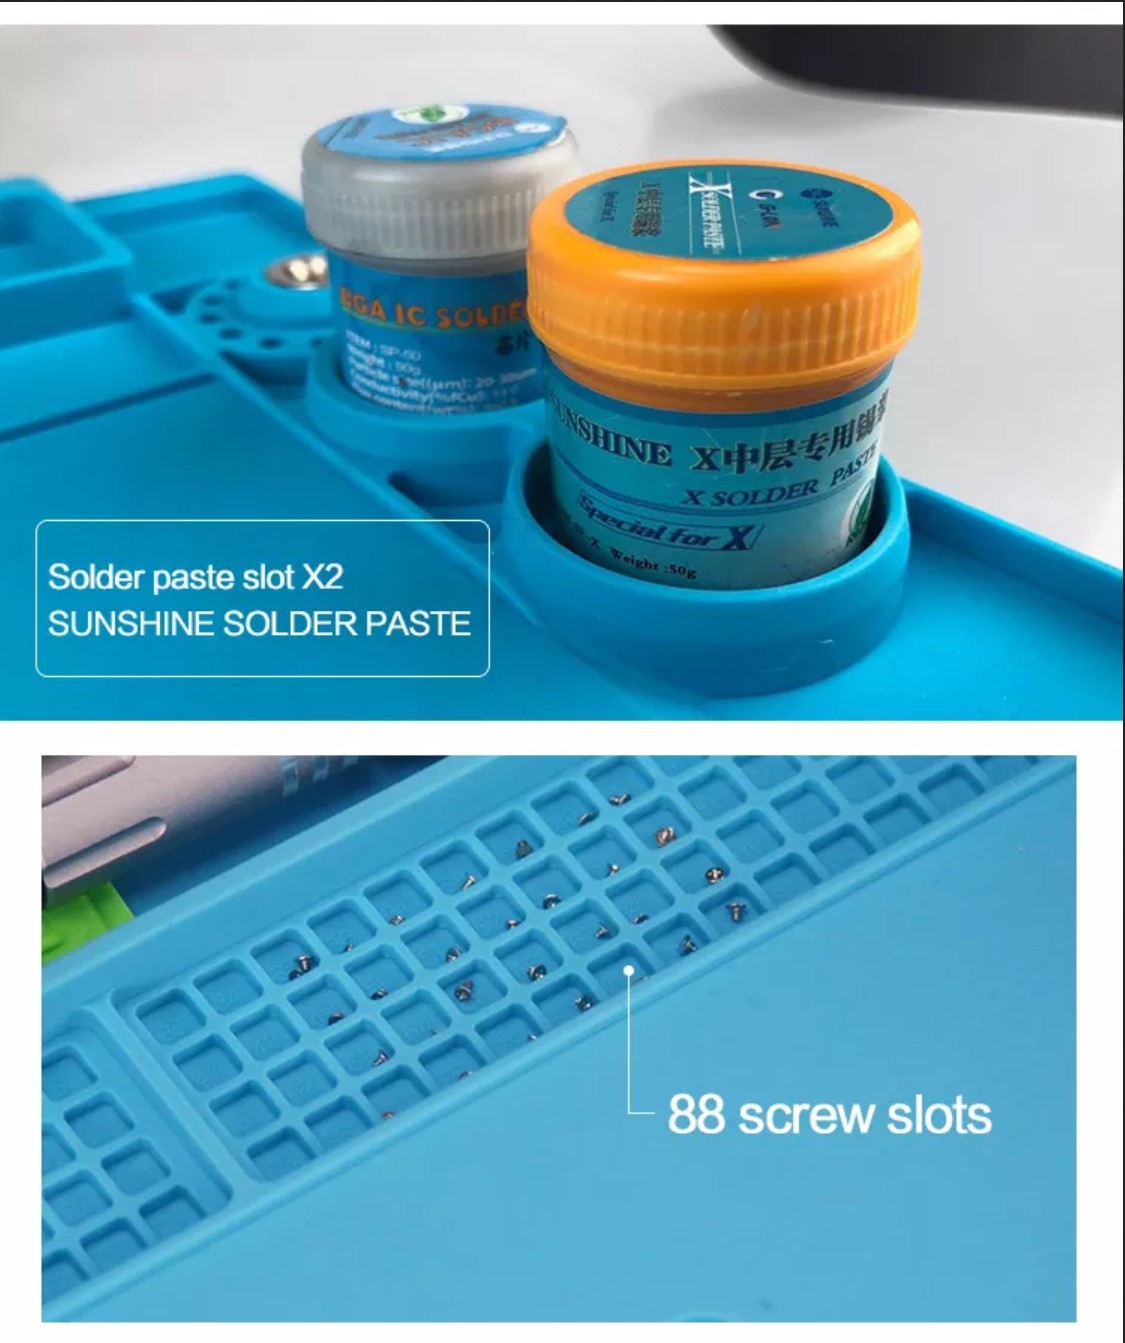 Sunshine SS-004E Multi-functional Silicone Soldering Pad